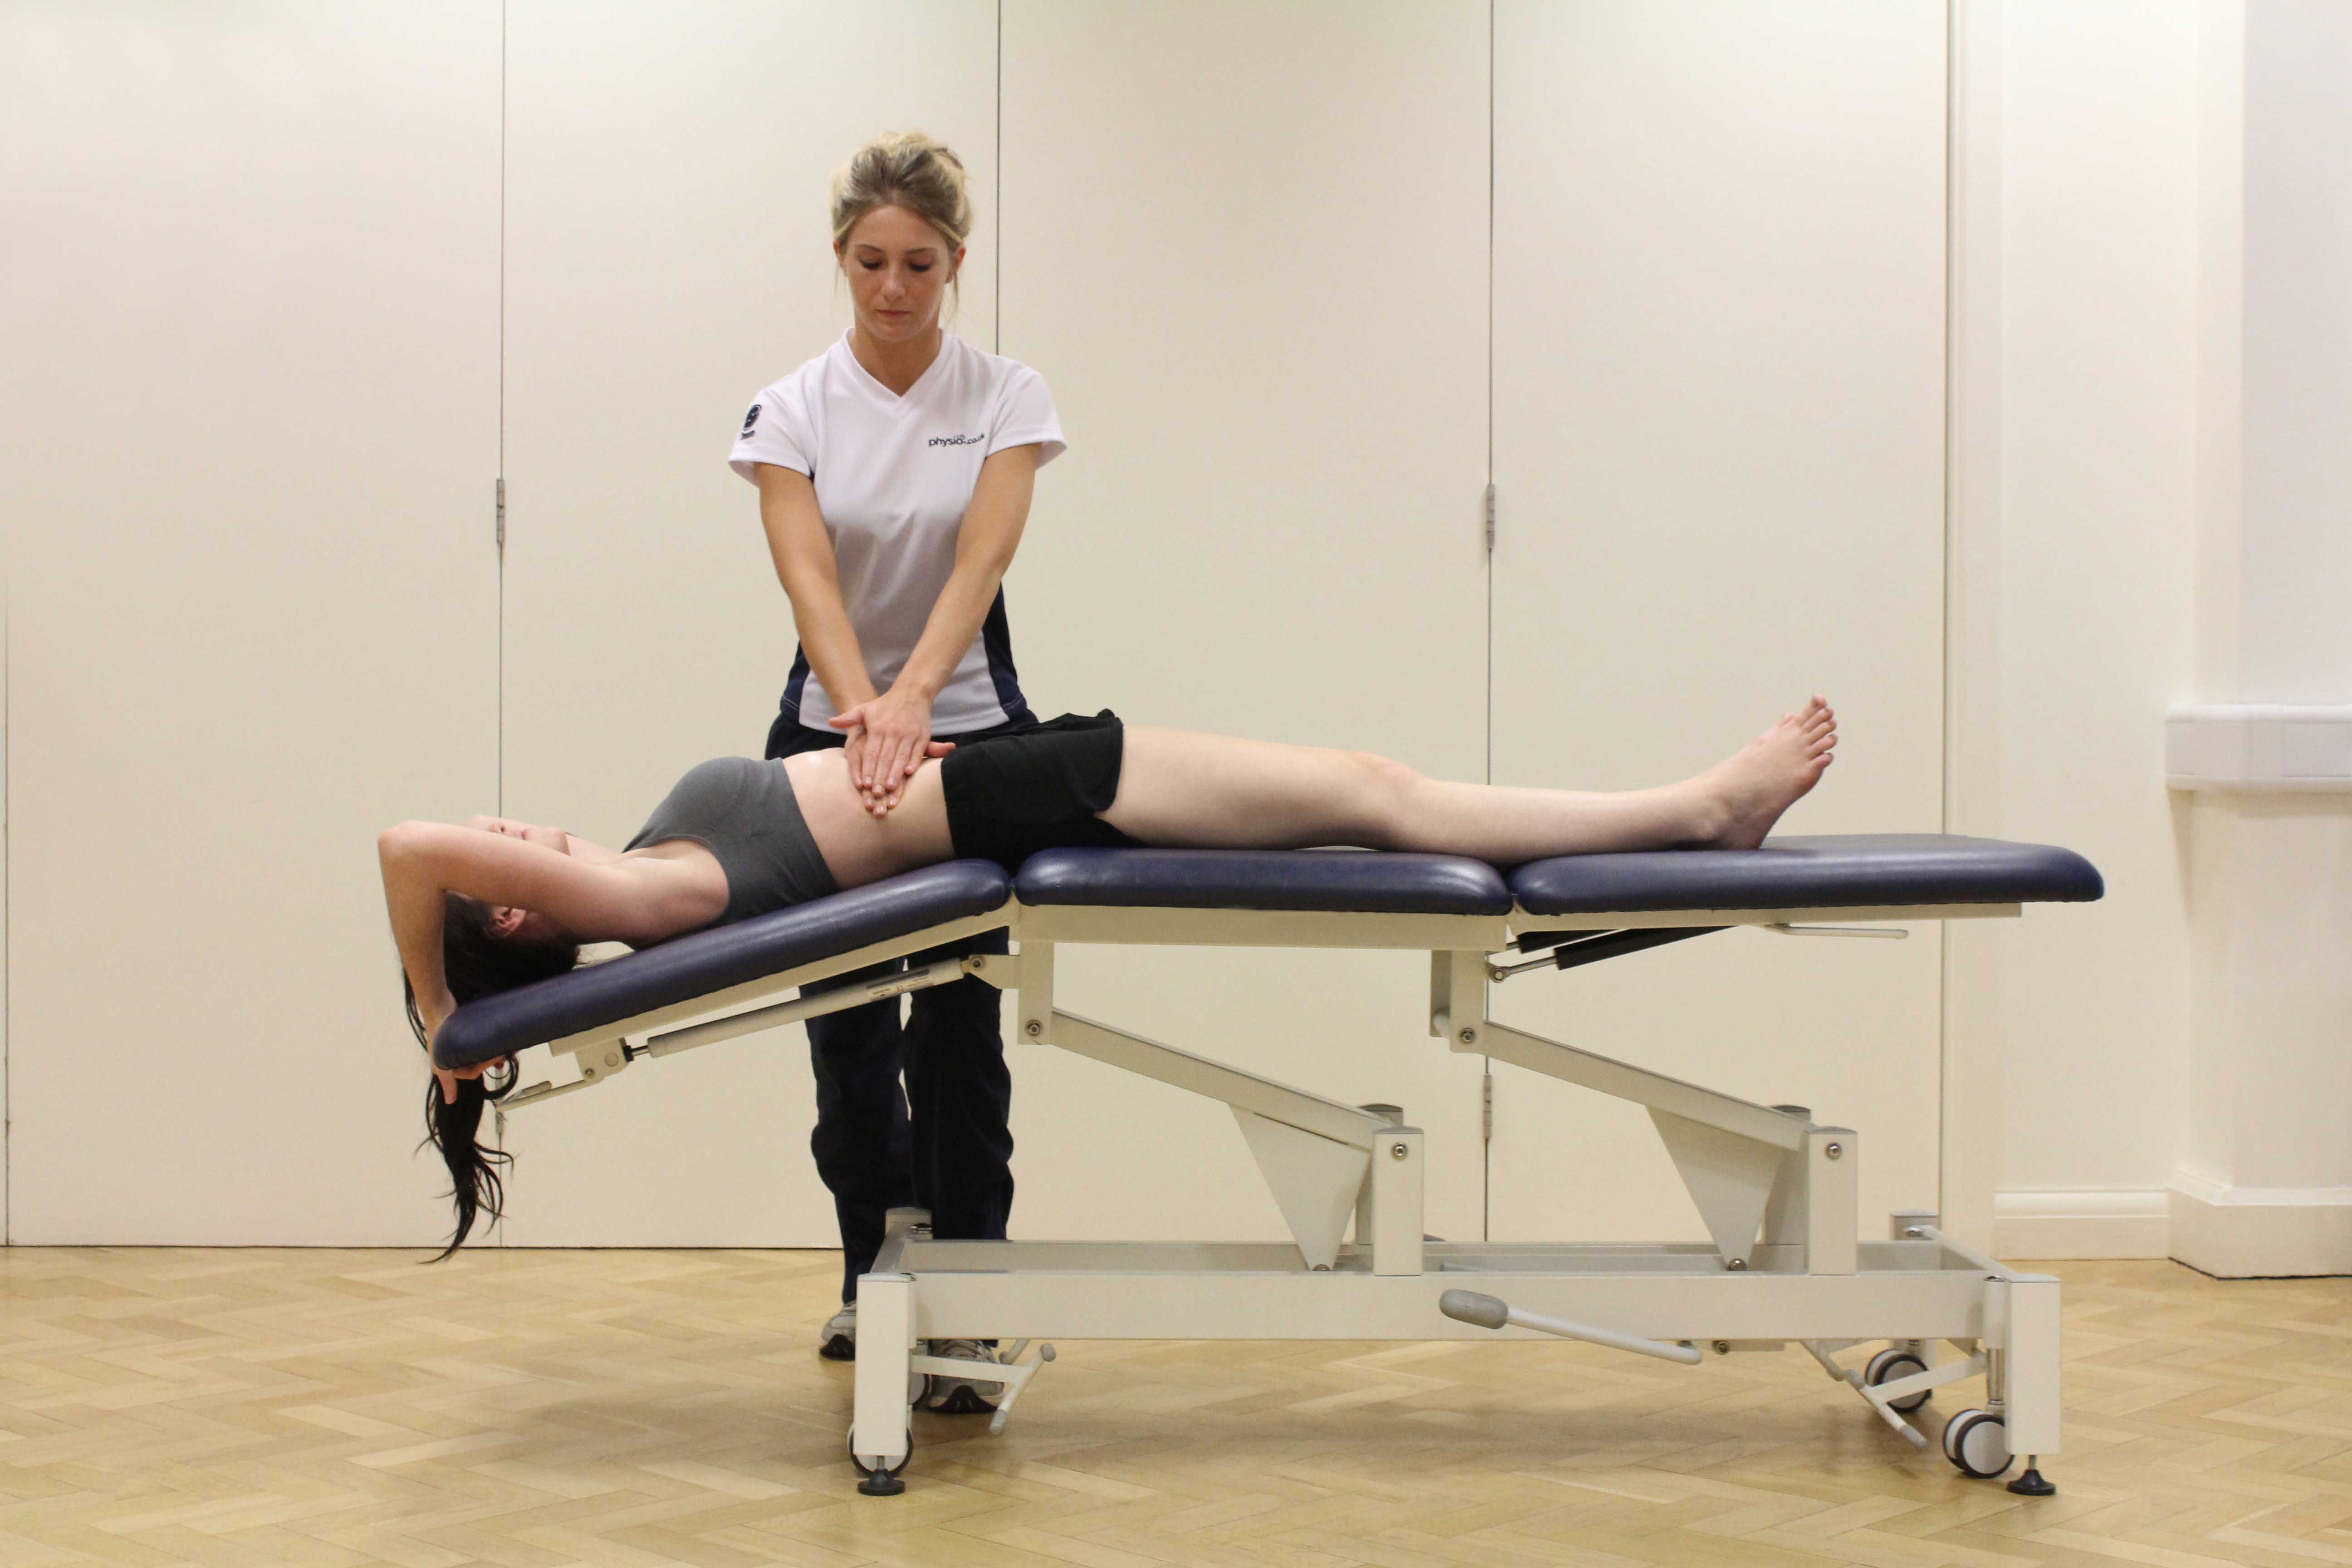 Soft tissue massage of the abdominal muscles by experienced MSK therapist